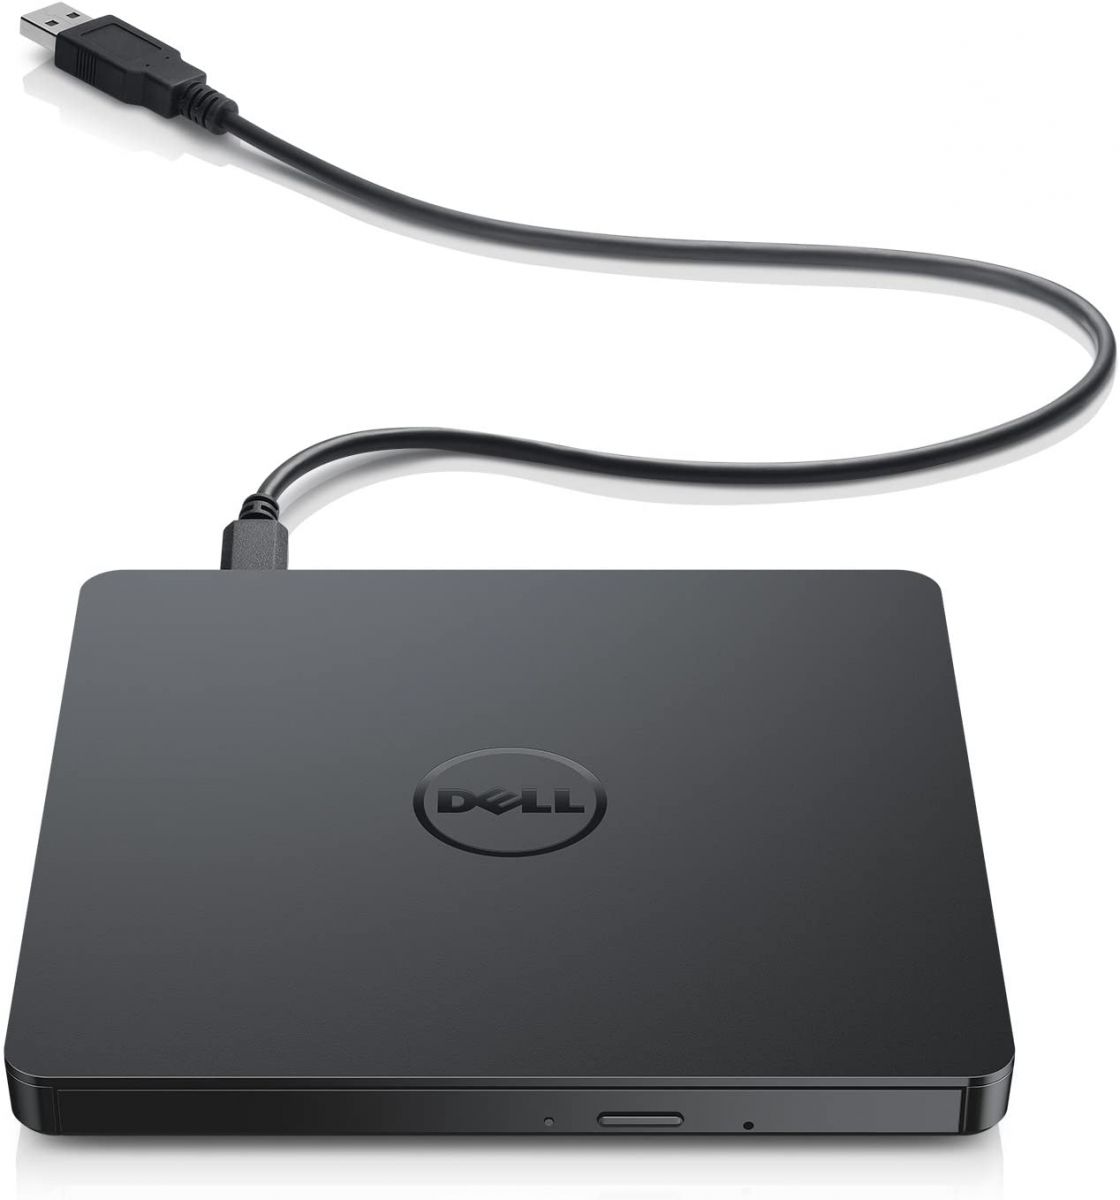 Image of a Dell USB External DVD Drive Model DW316